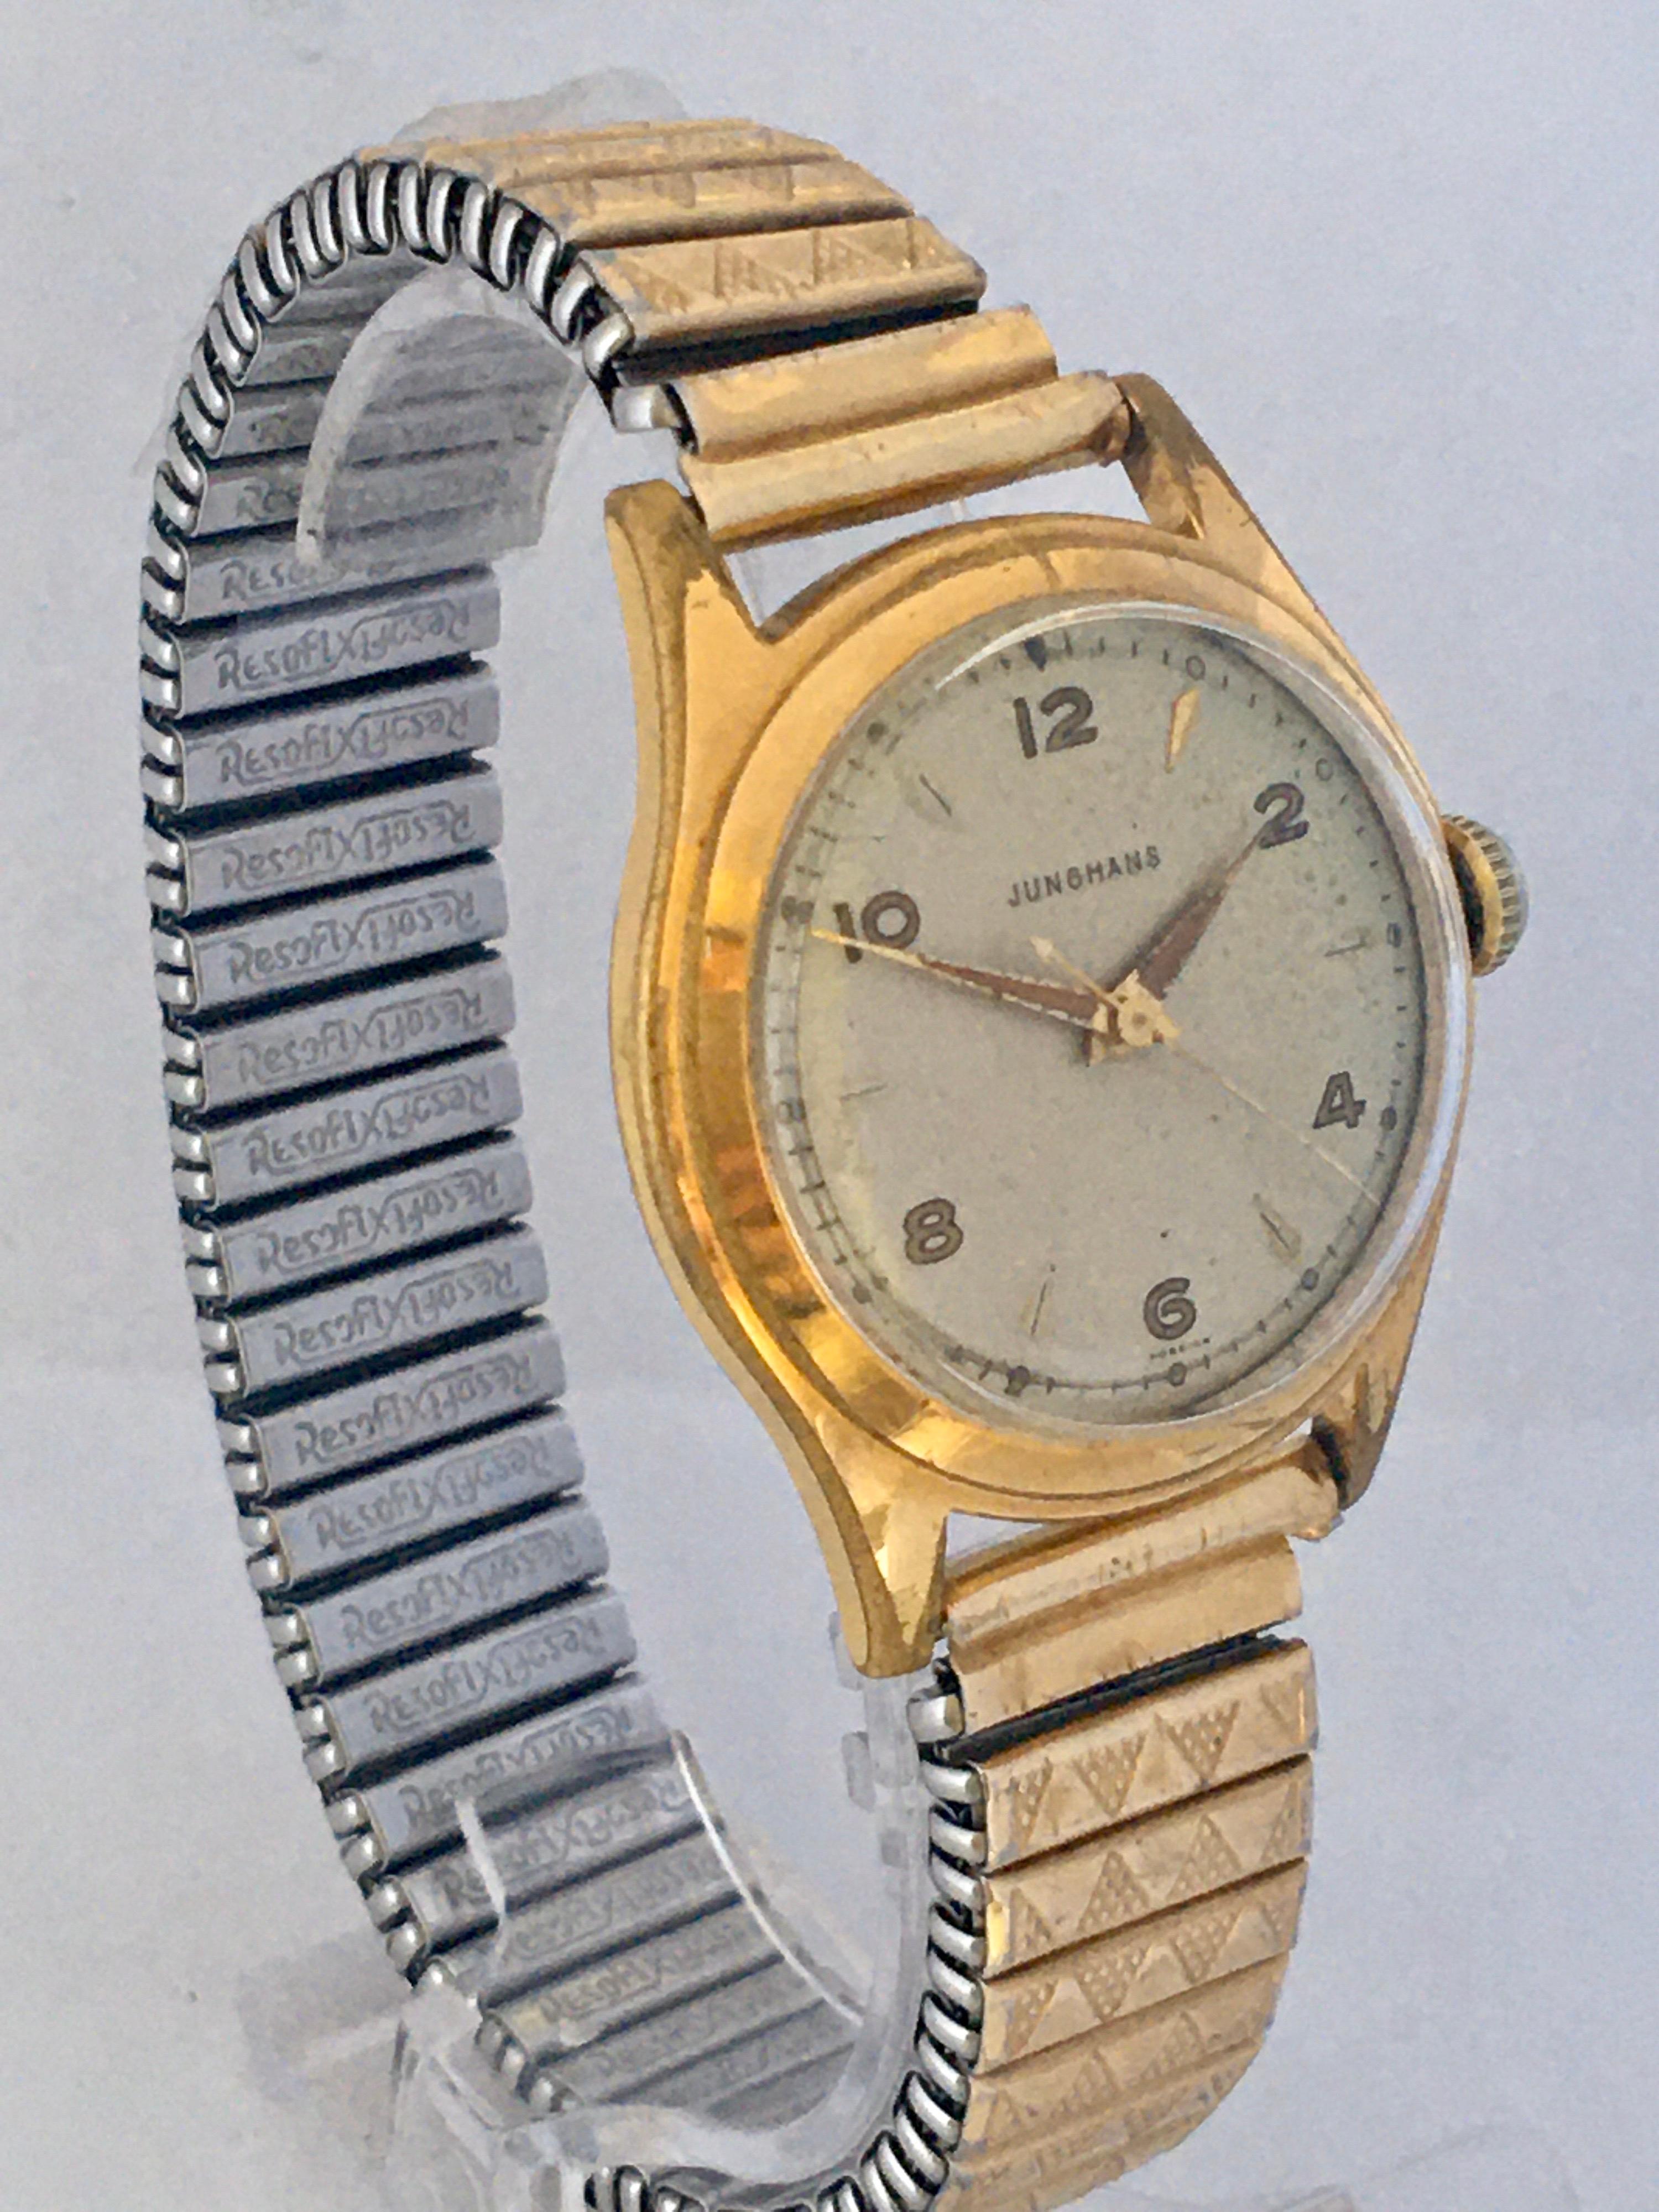 This beautiful pre-owned vintage Gold plated manual winding Watch is working and it is ticking well. Visible signs of ageing and wear with scratches on the watch case and on the glass. The watch case, hands and Bessel are tarnished as shown.

Please